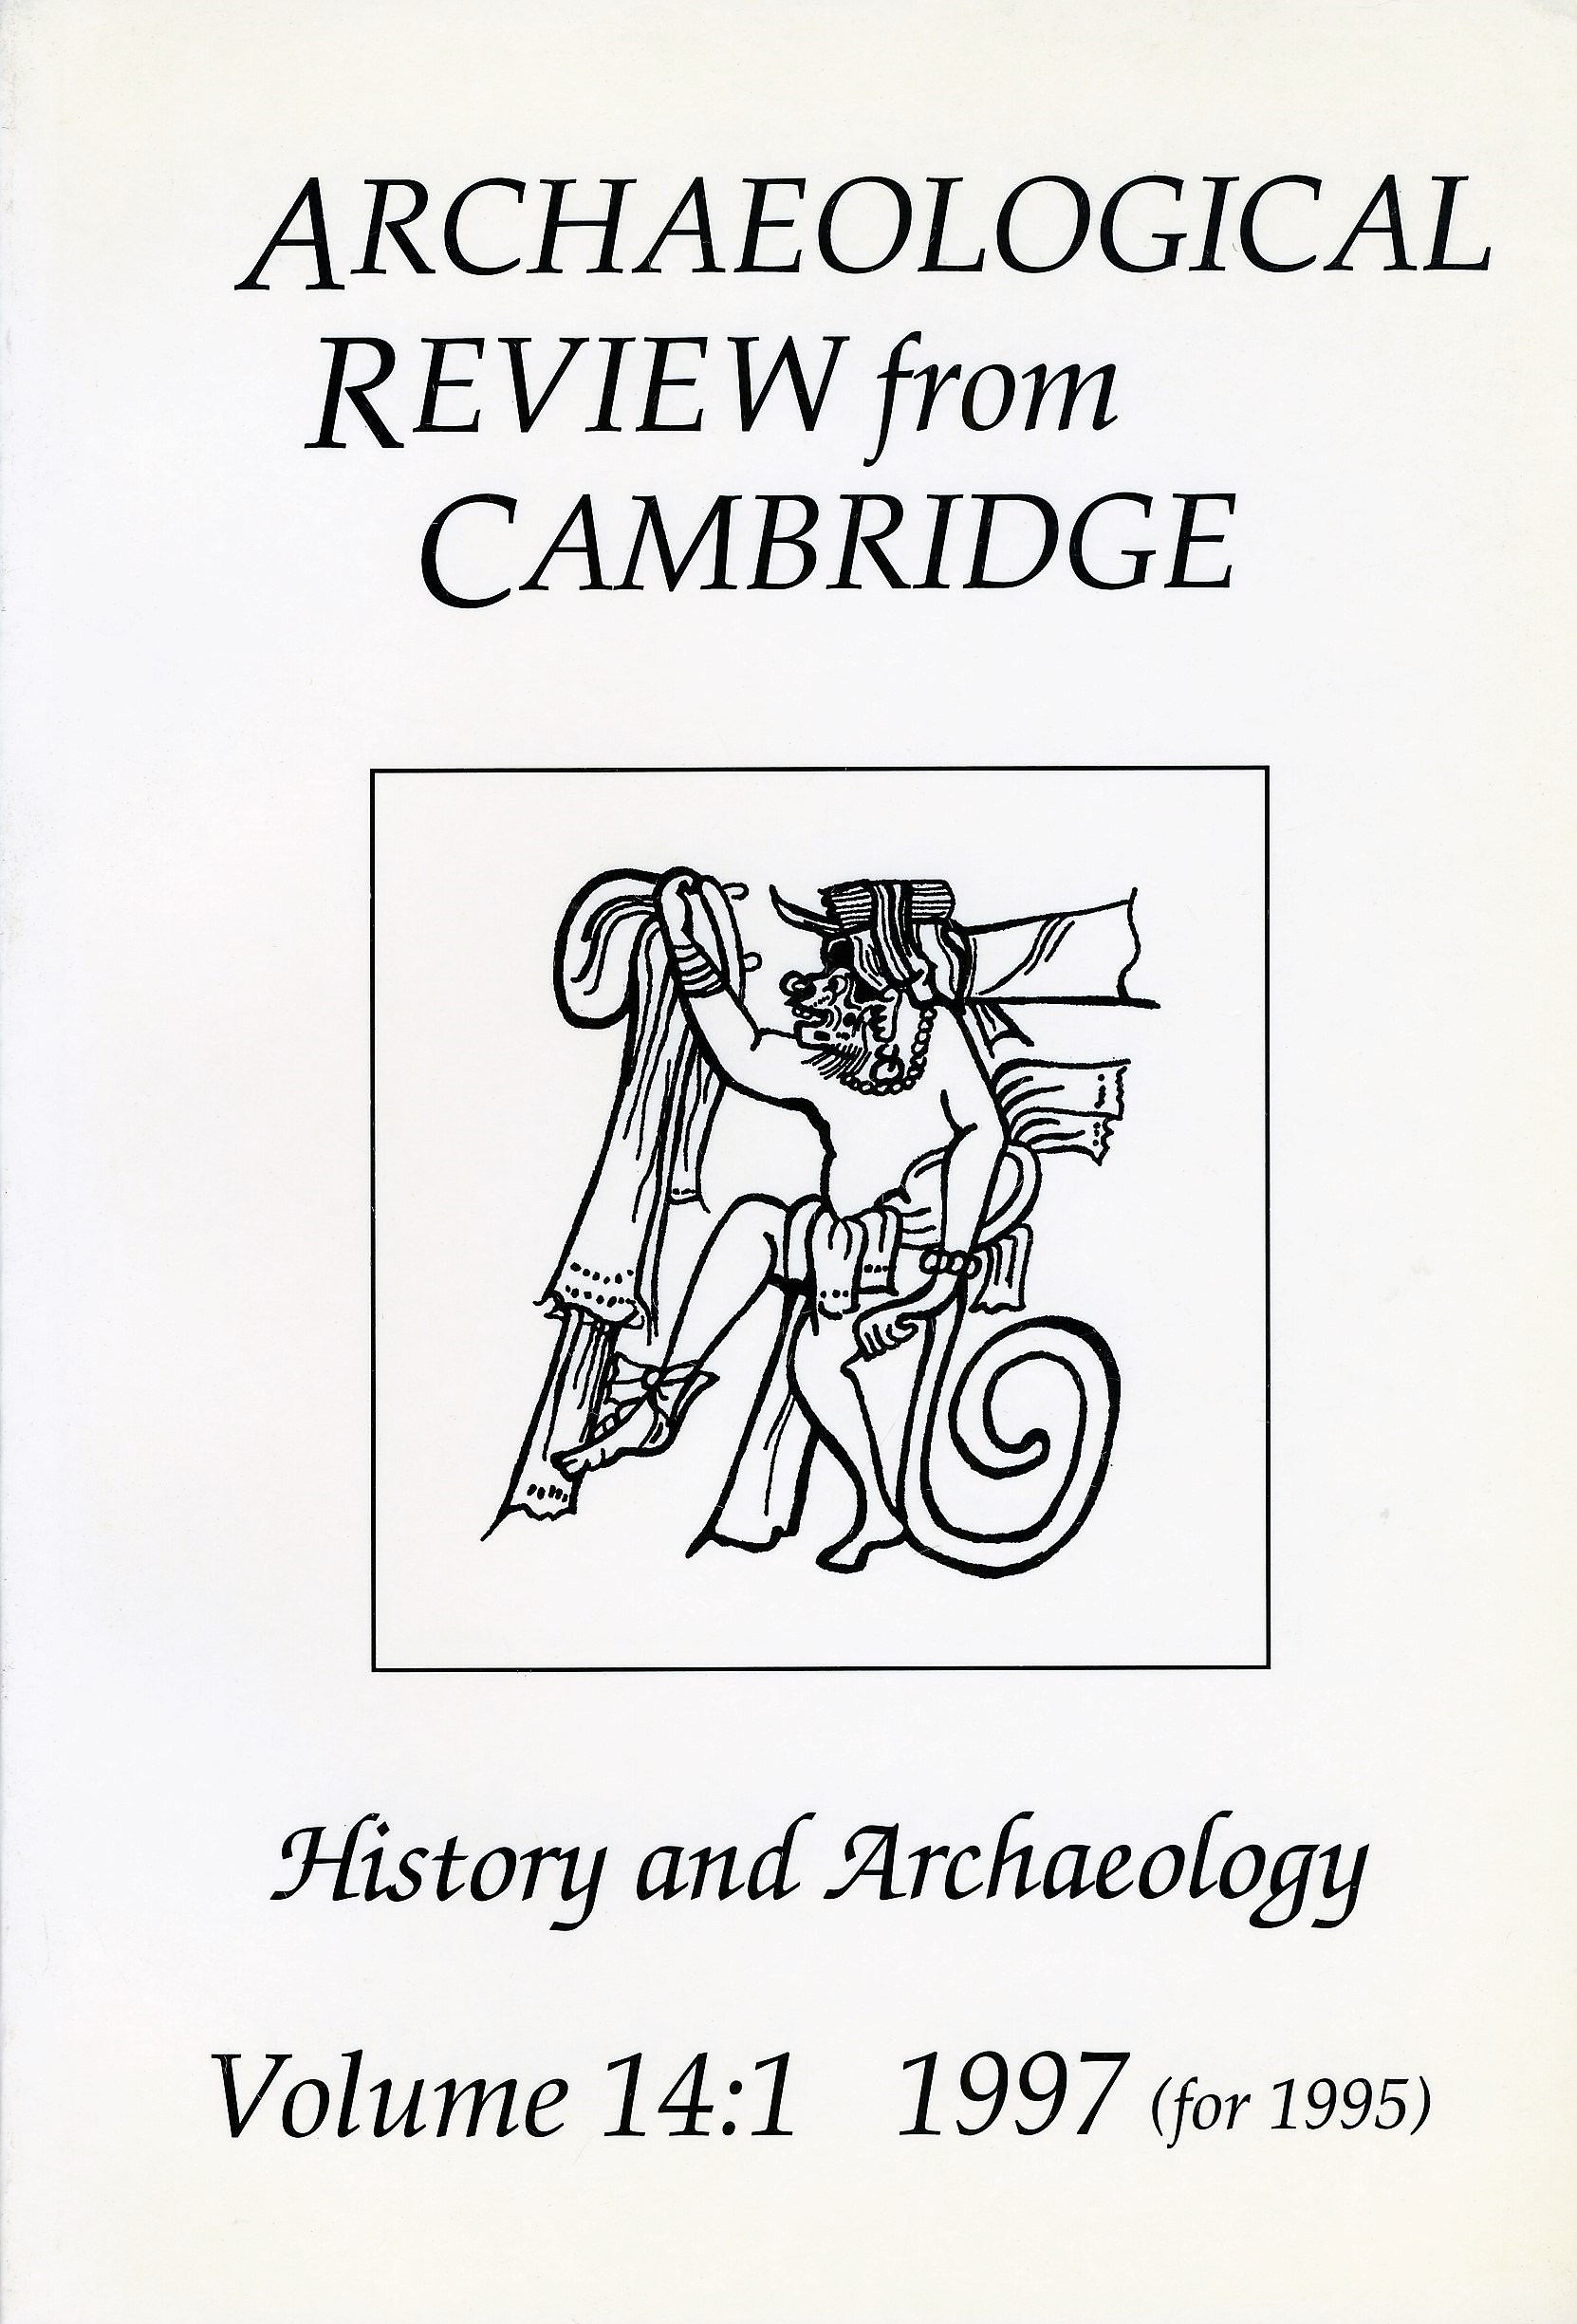 History and Archaeology